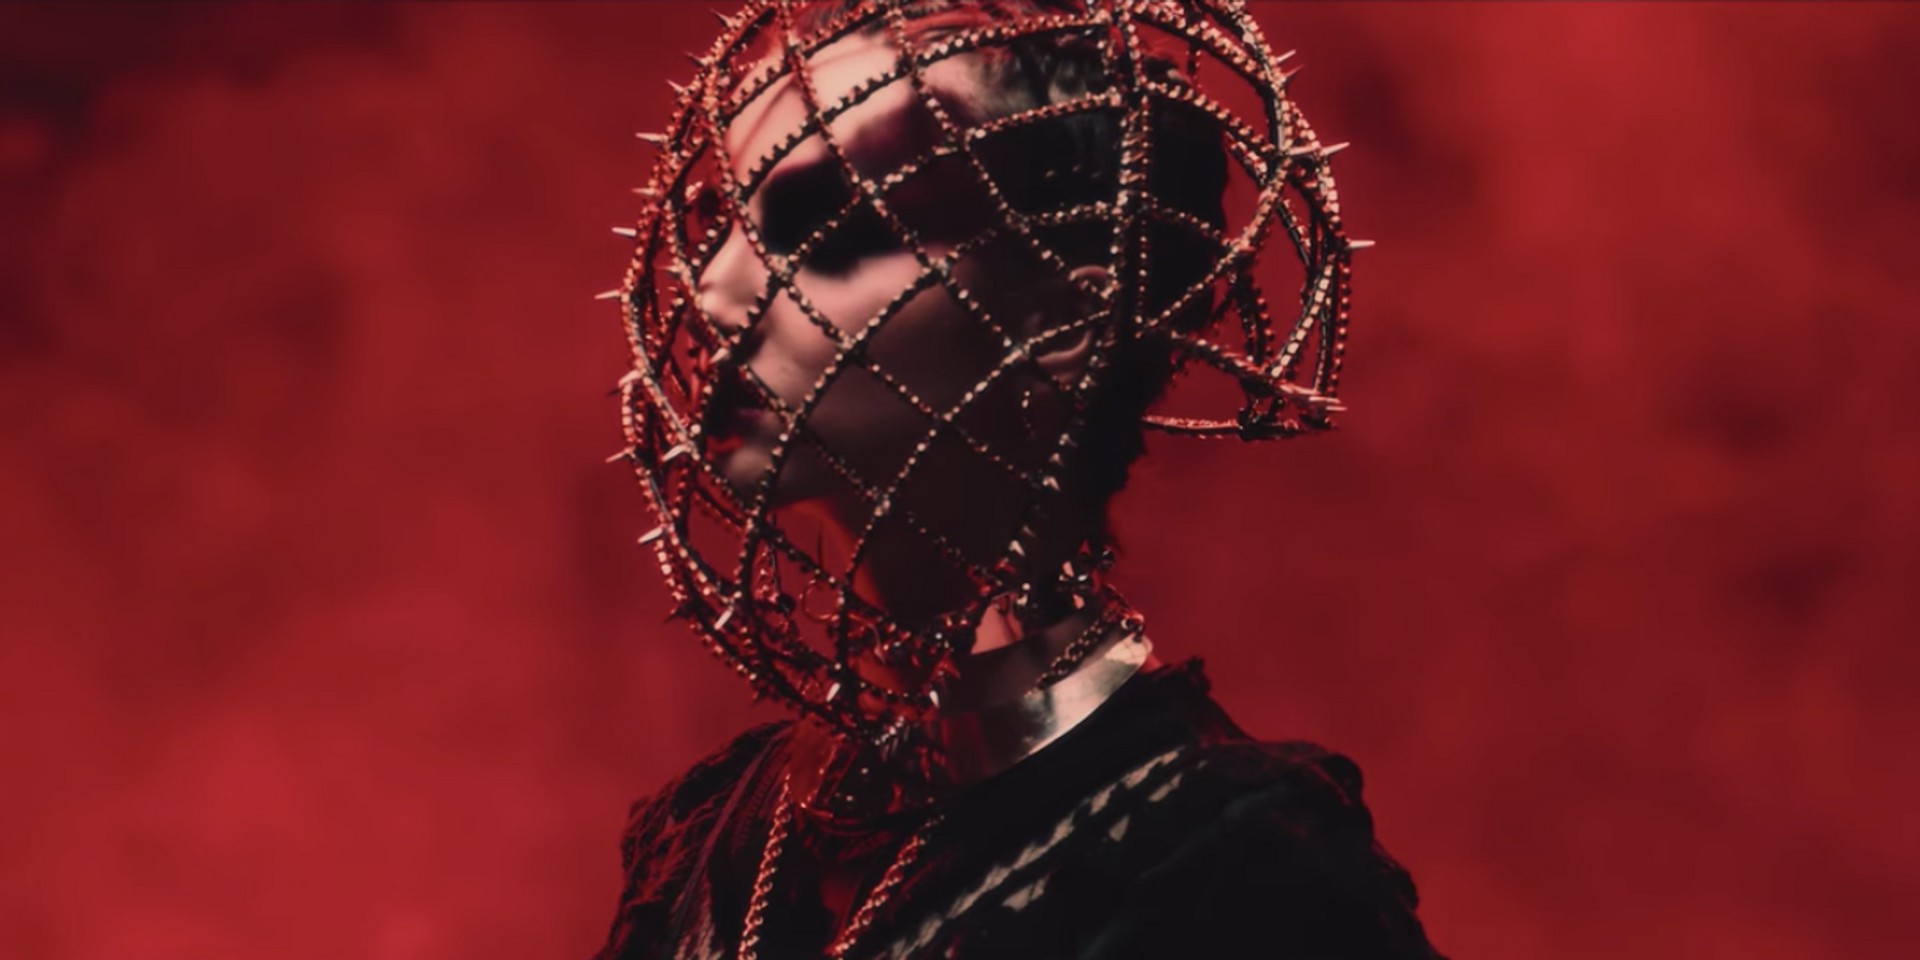 BABYMETAL release music video for new single 'Distortion' – watch